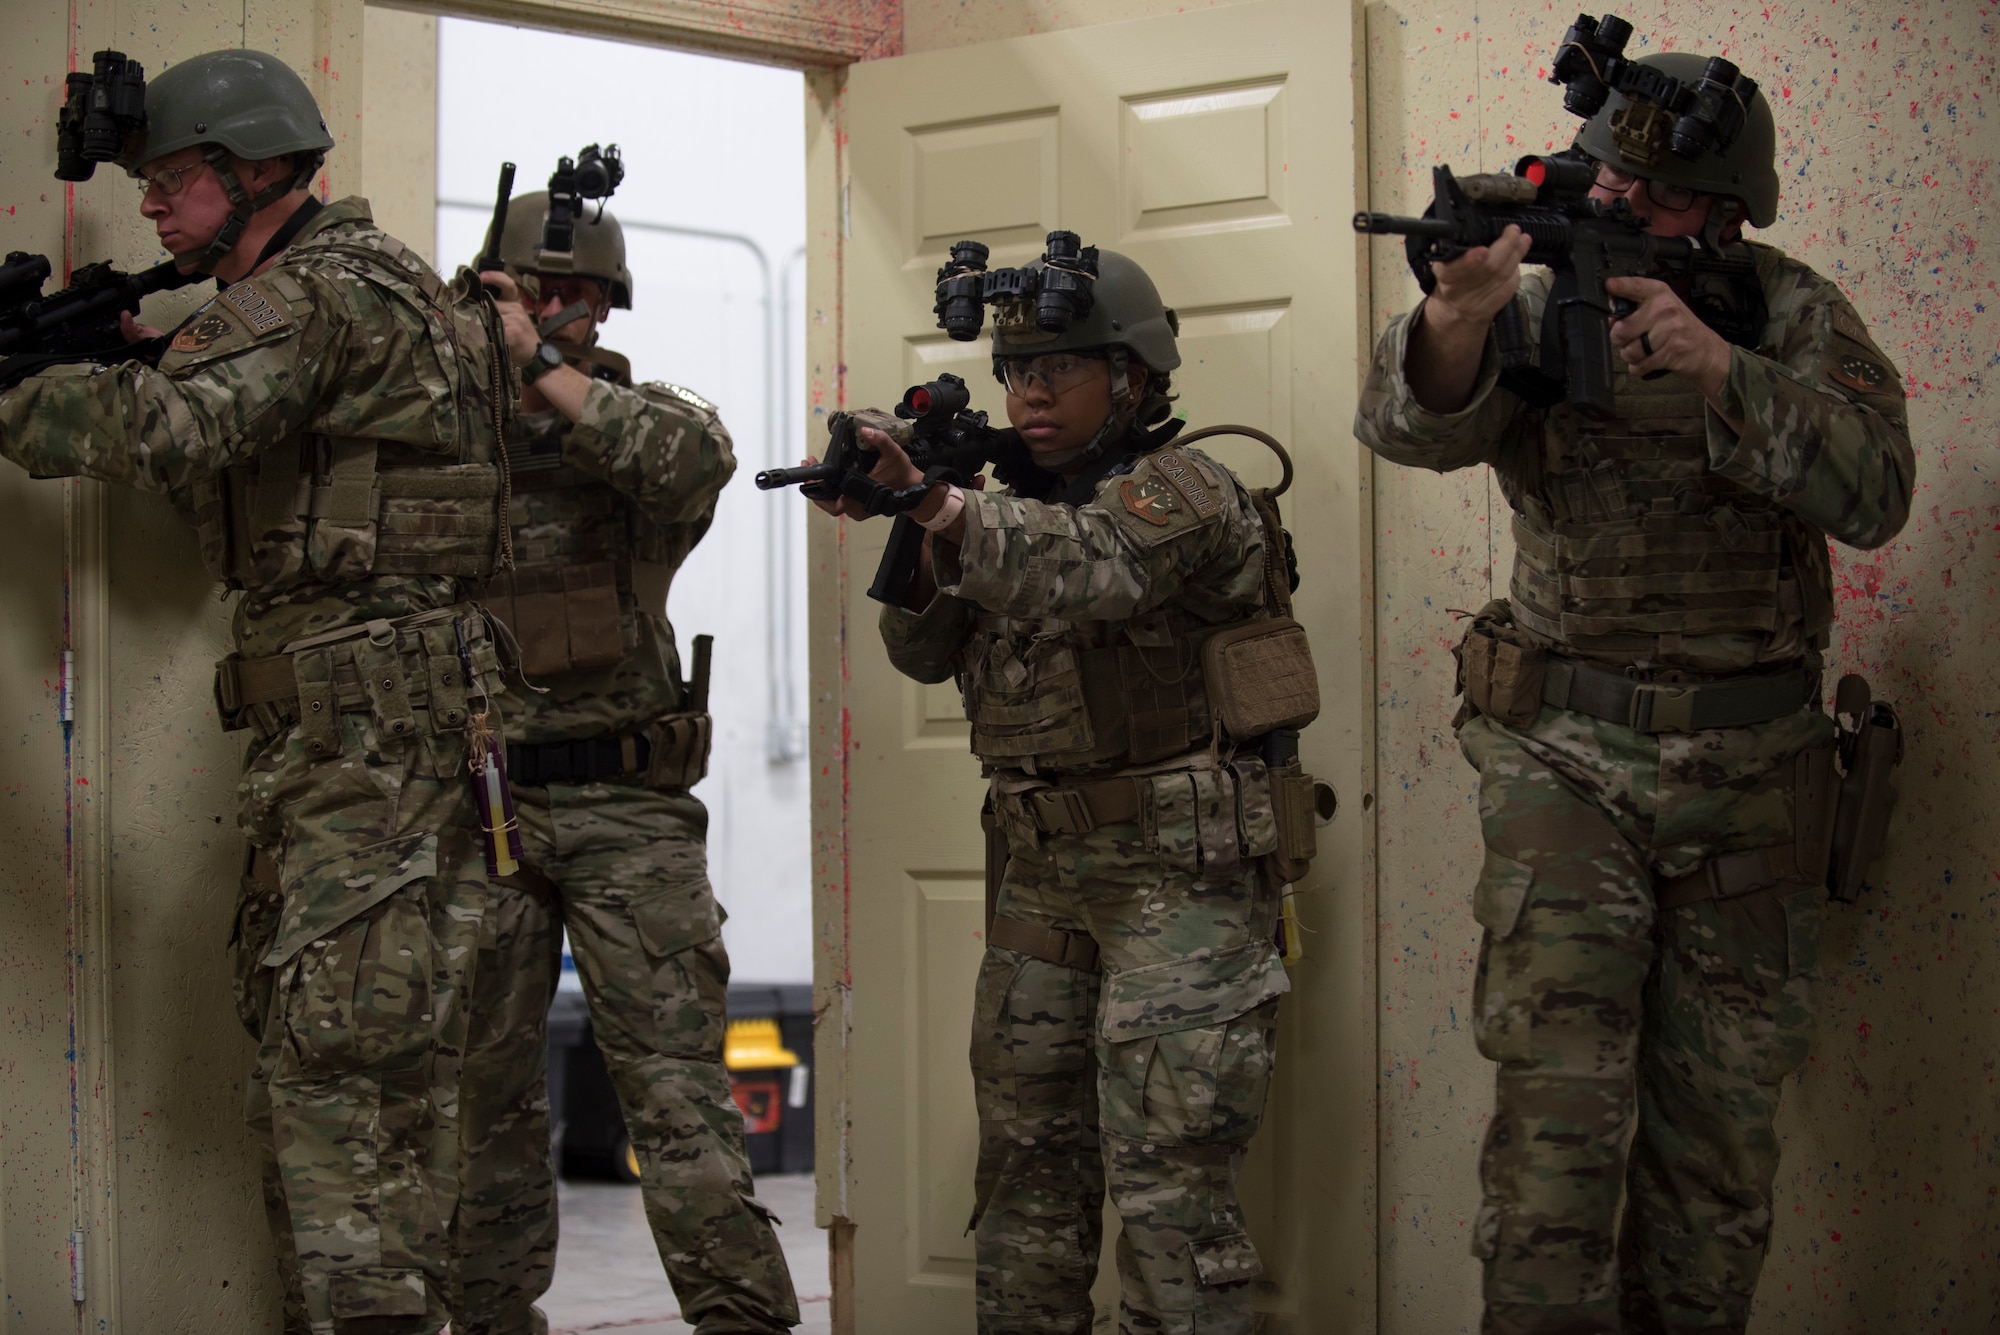 The response force tactical course cadre give a demonstration, to Air Force Global Strike Command defenders during a response force tactical course, on how to properly infiltrate a building during an active shooter scenario Mar. 27, 2019, at the 90th Ground Combat Training Squadron, Camp Guernsey, Wyo. During the training, the Airmen went over various tactics on entering and clearing a room, brushed up on M4 and M9 shooting and went through simulated night time situations with night vision goggles. (U.S. Air Force photo by Senior Airman Abbigayle Williams)